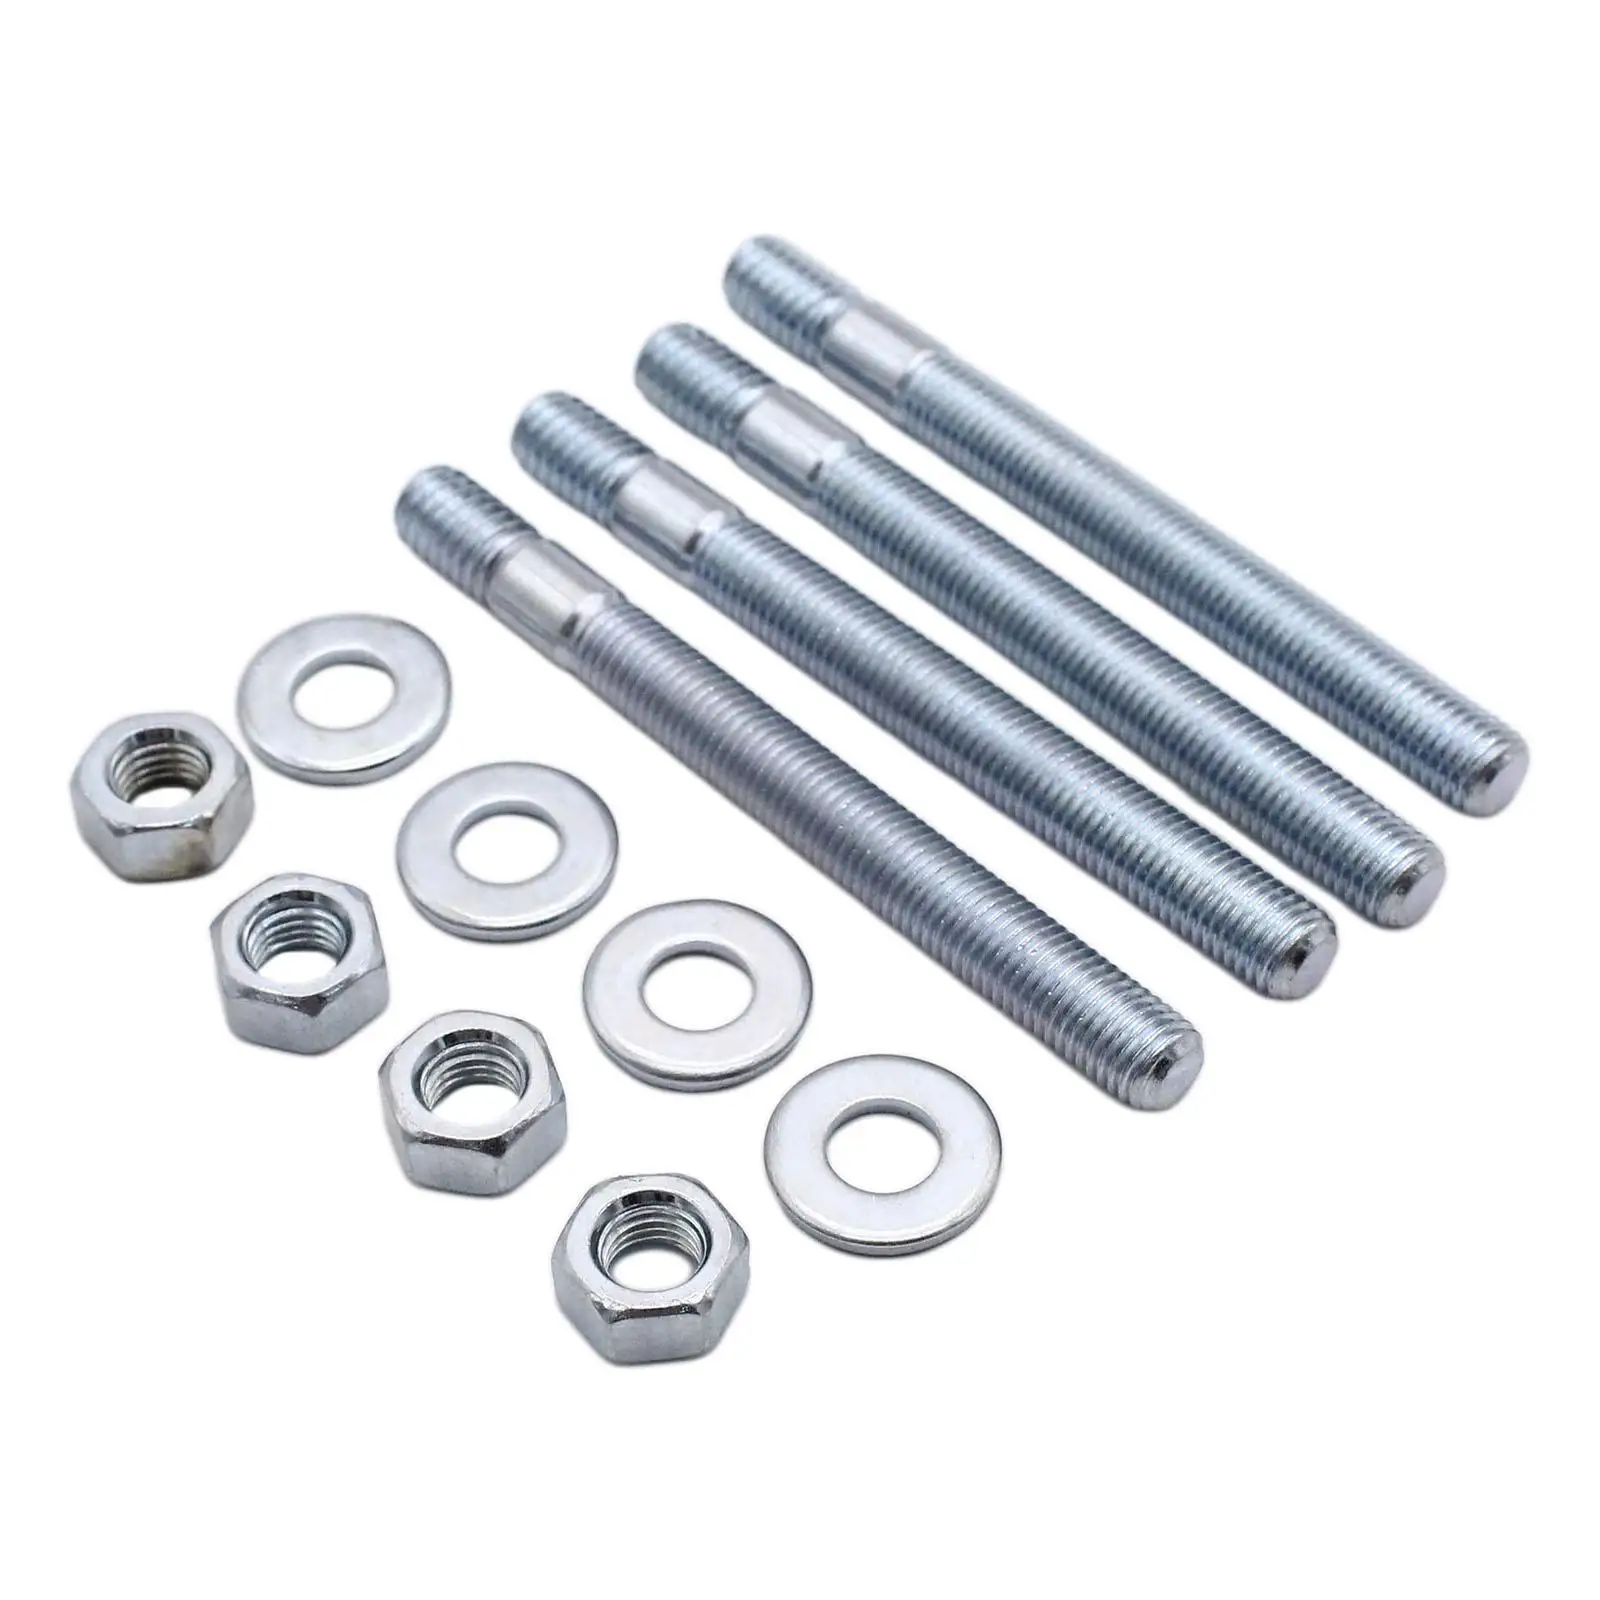 Carb Installation Hardware Bolts High Reliability Carb Studs for